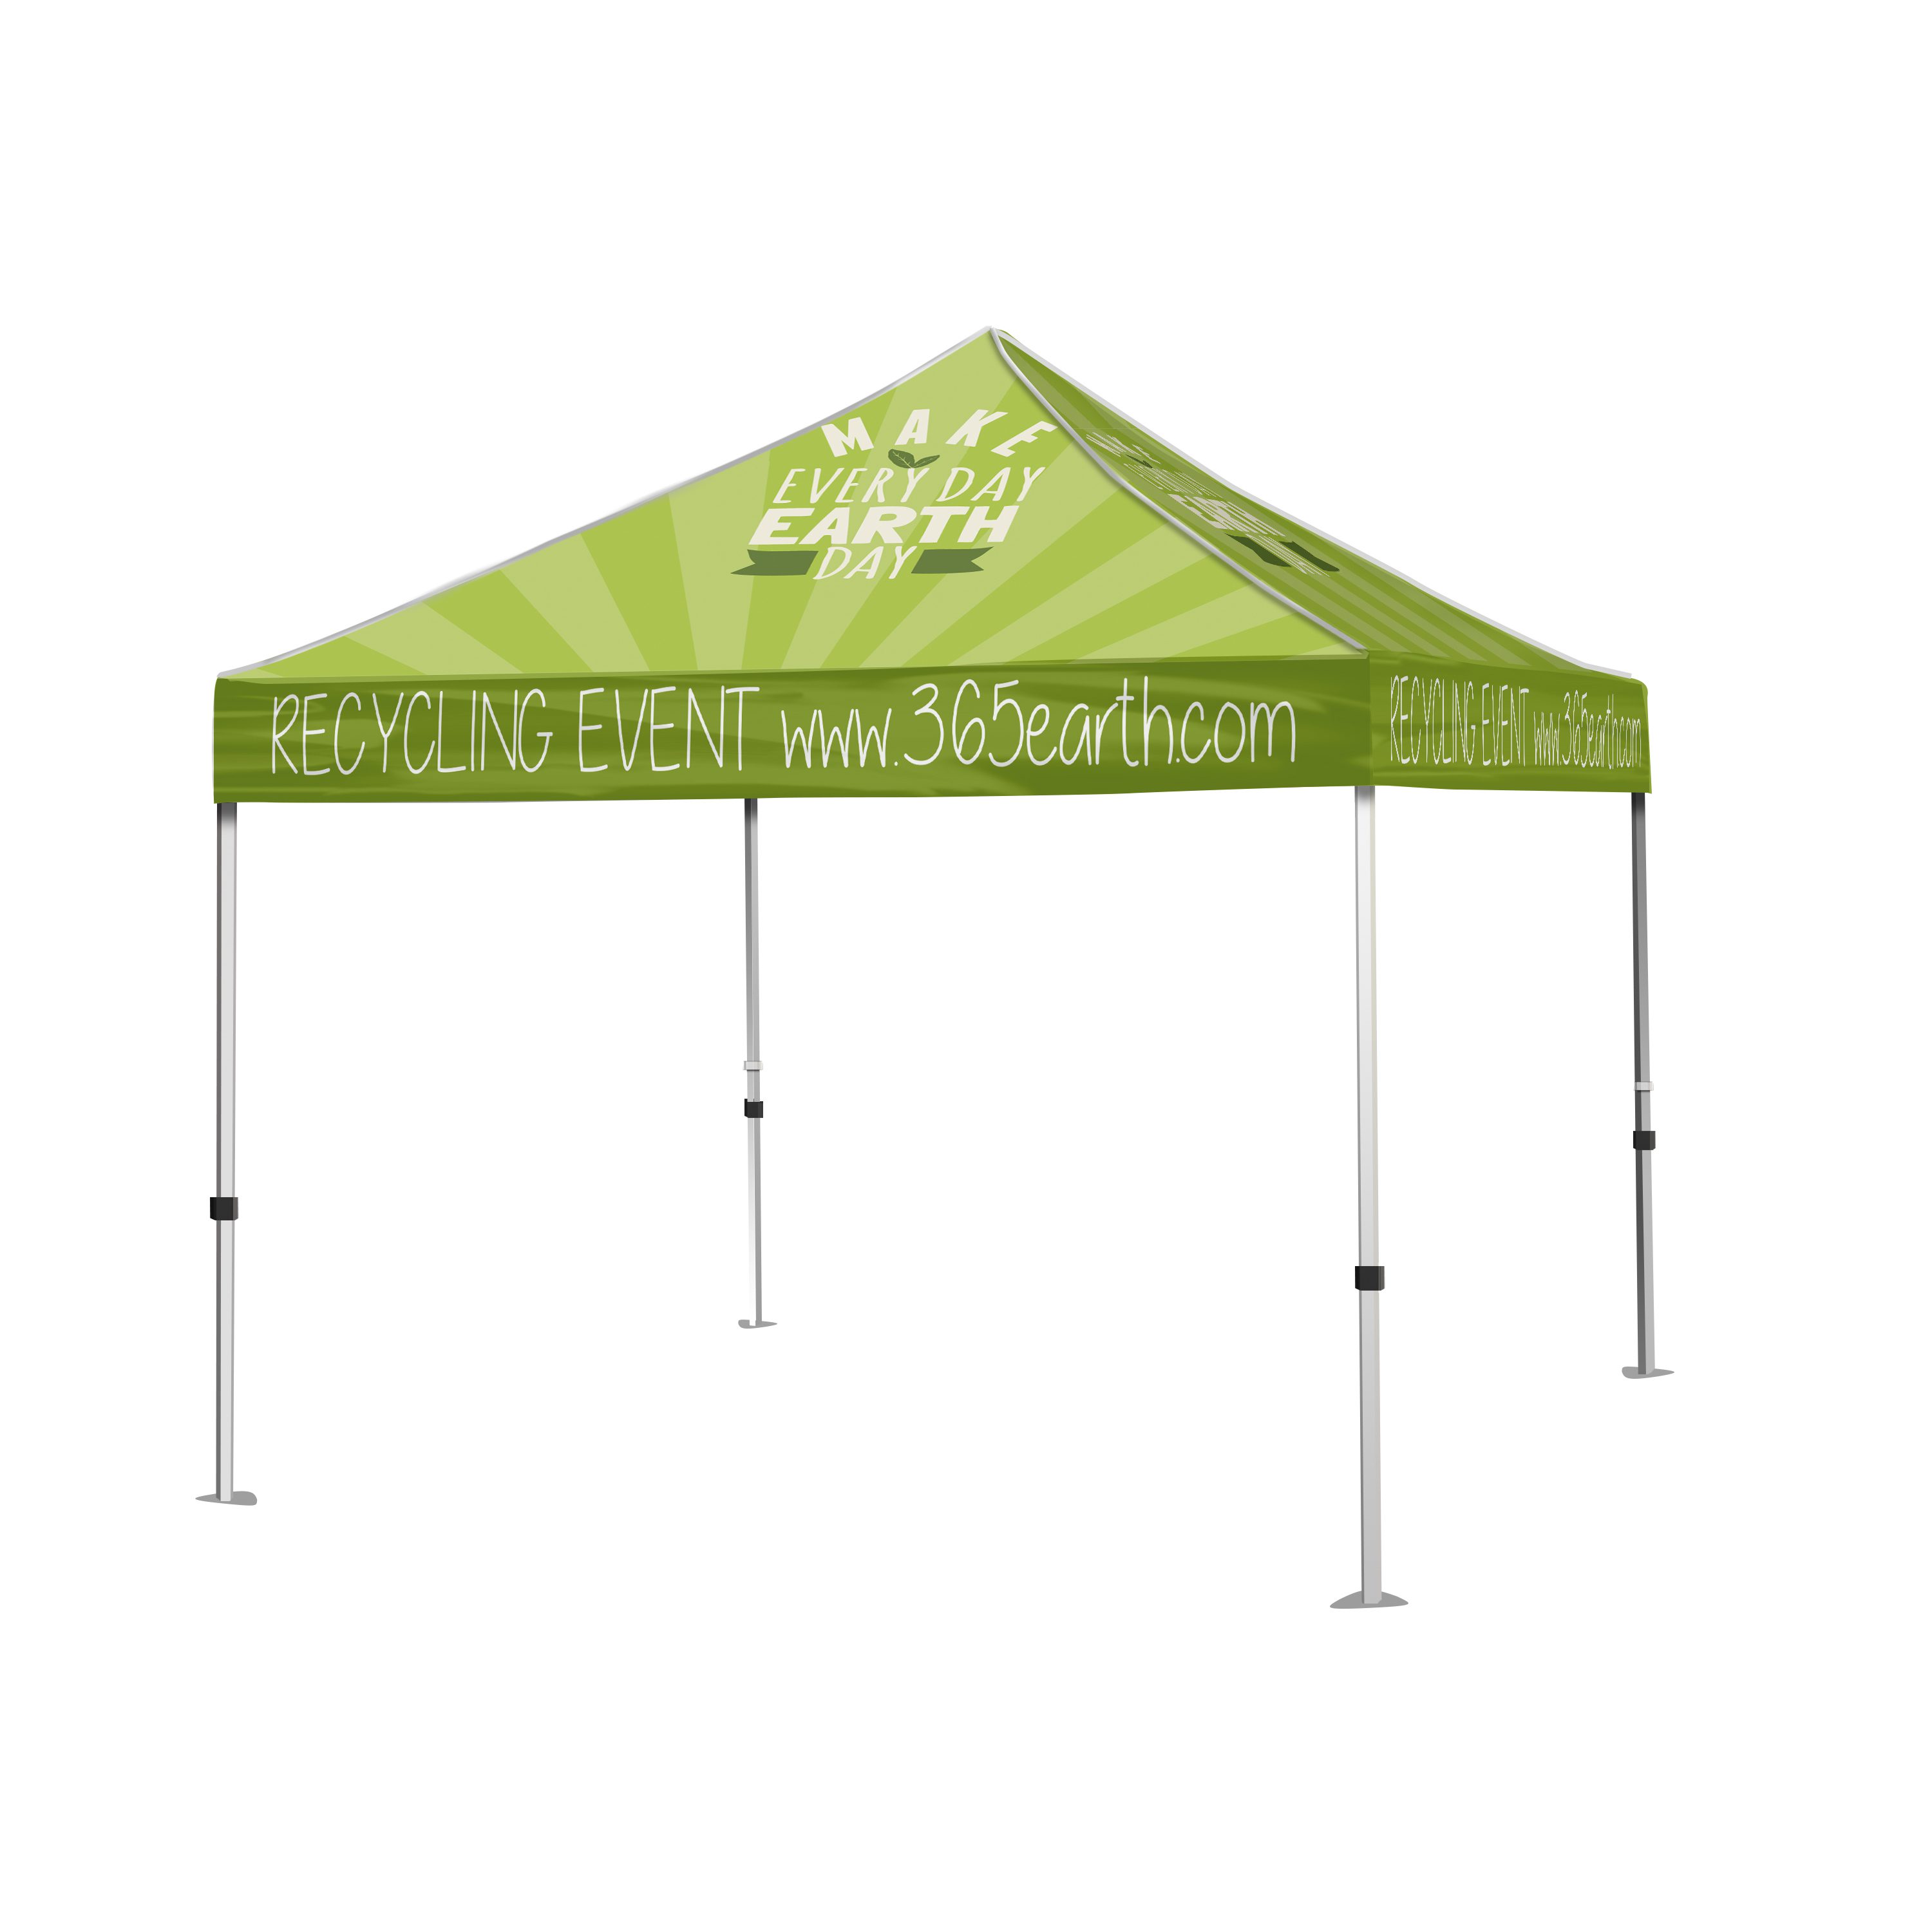 Series B Tent Product Image 1